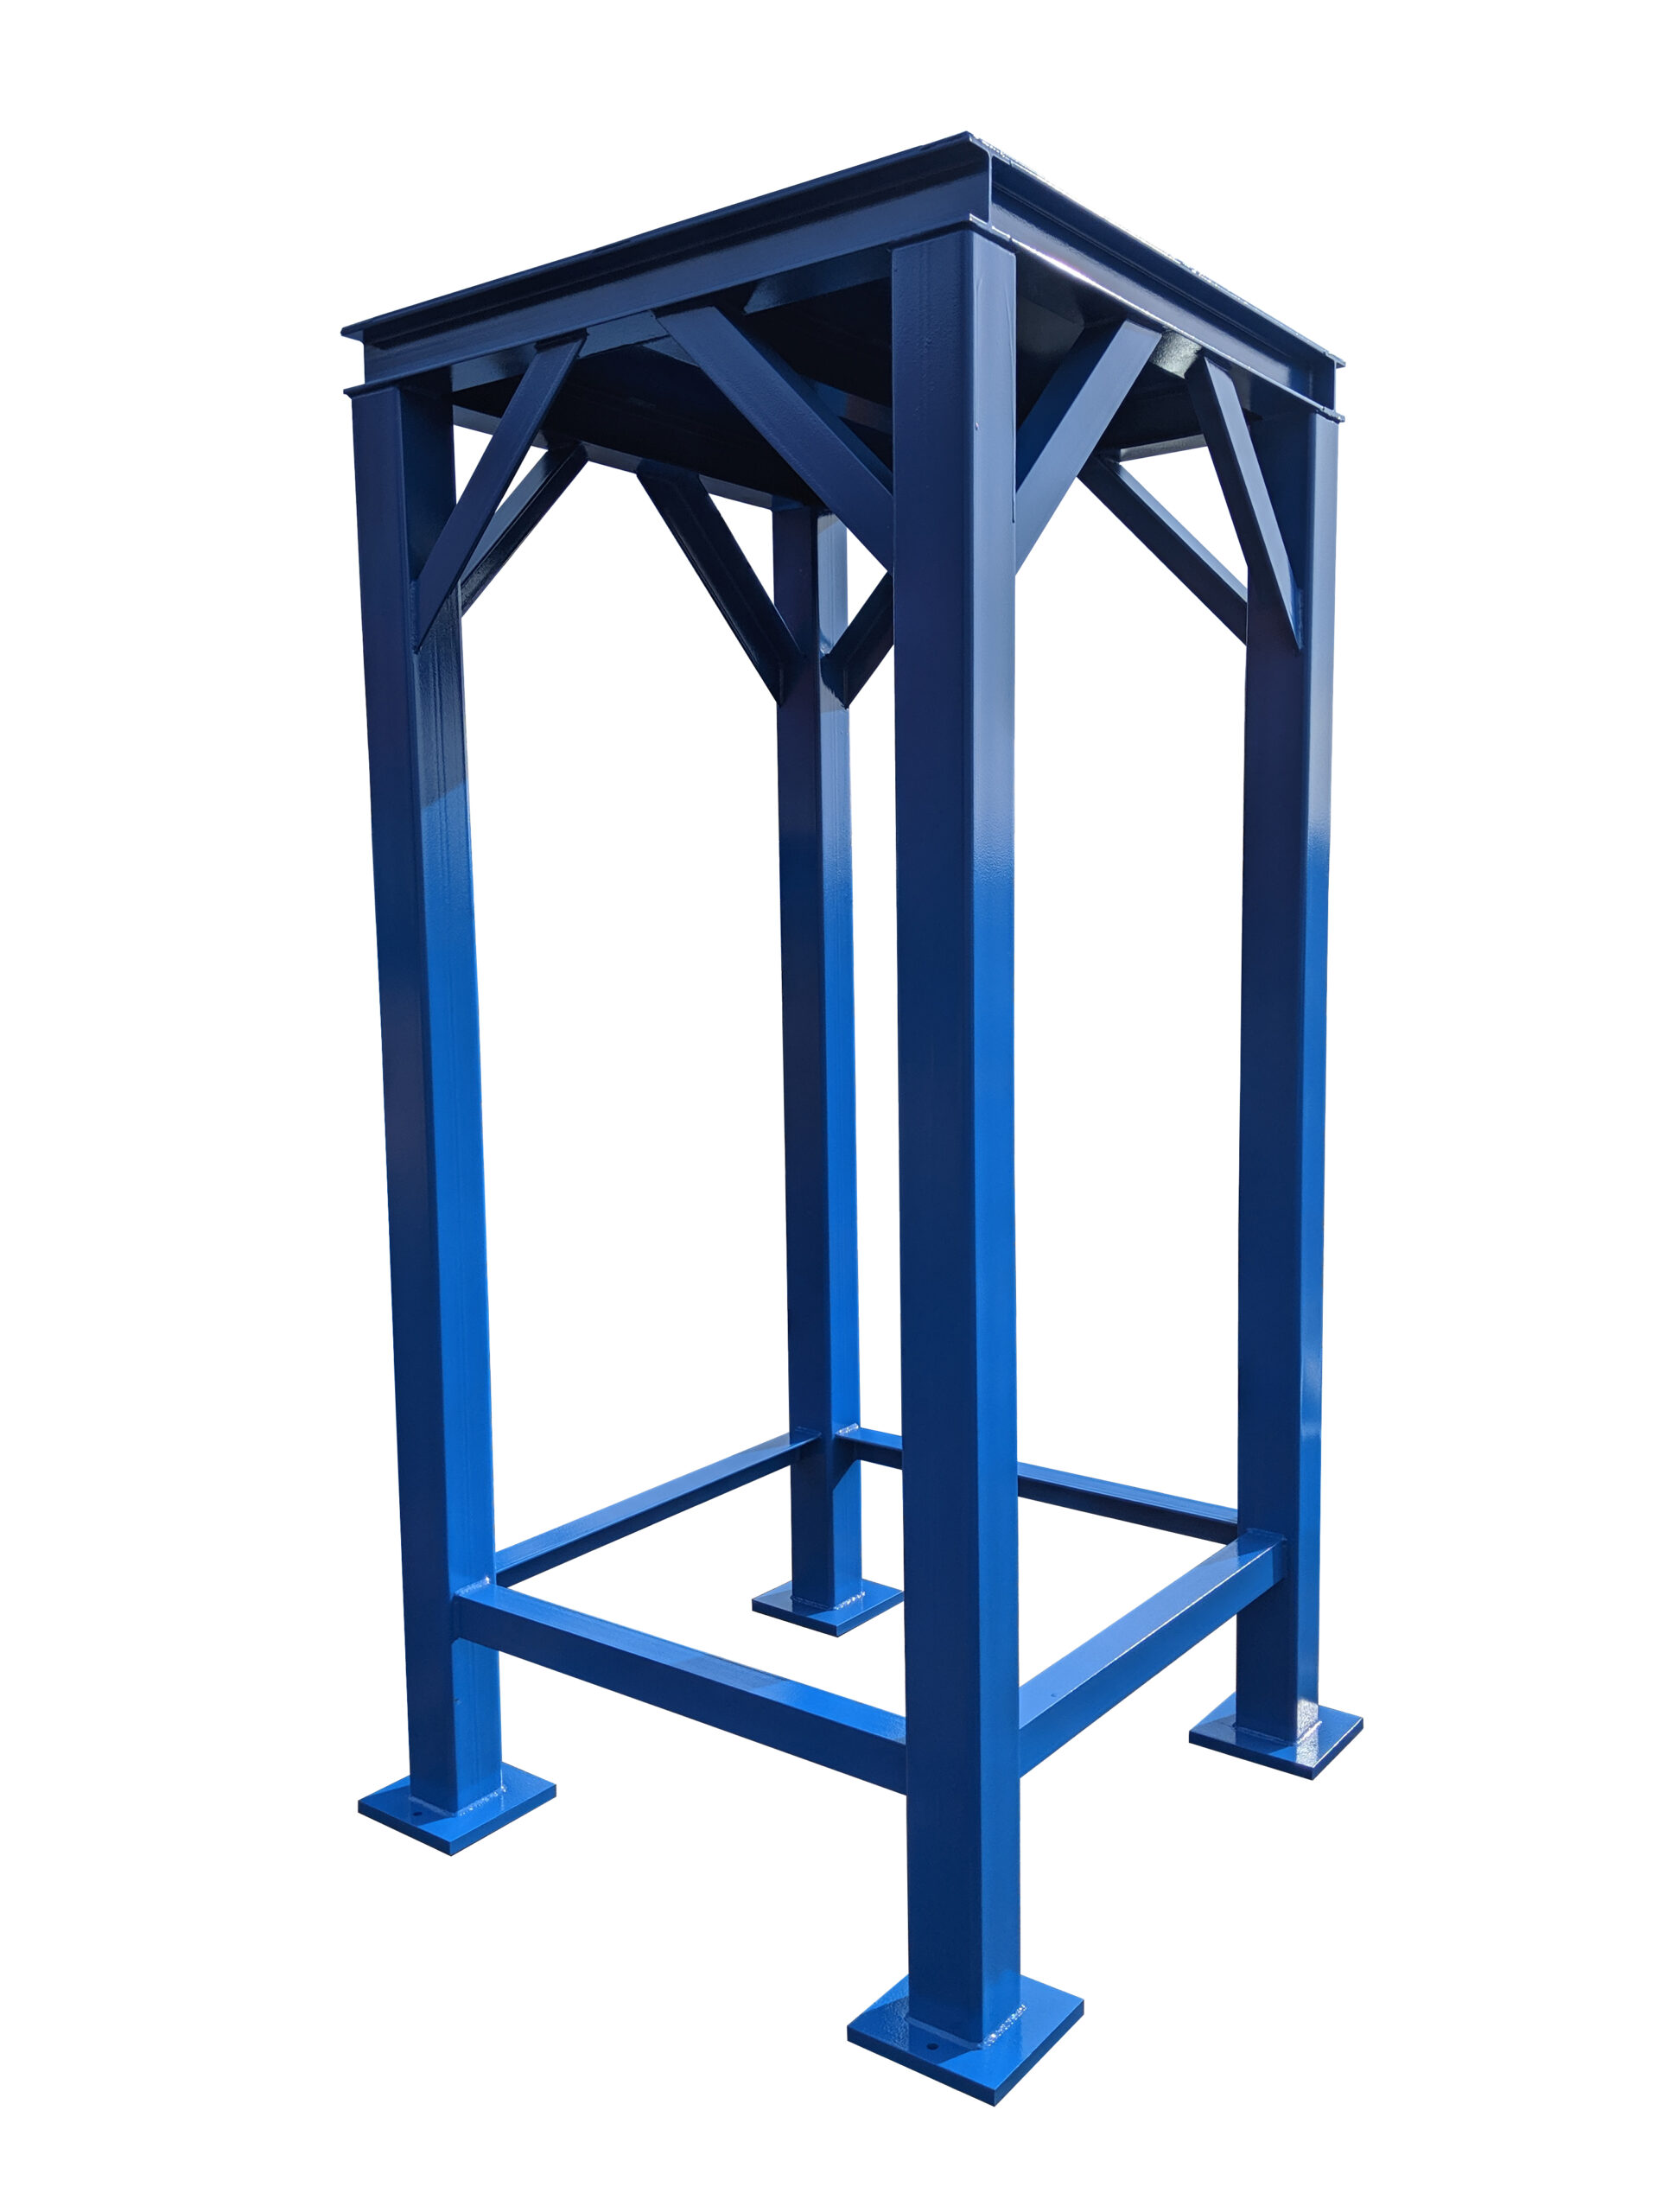 Customized Steel Tank Stands - Build to Order